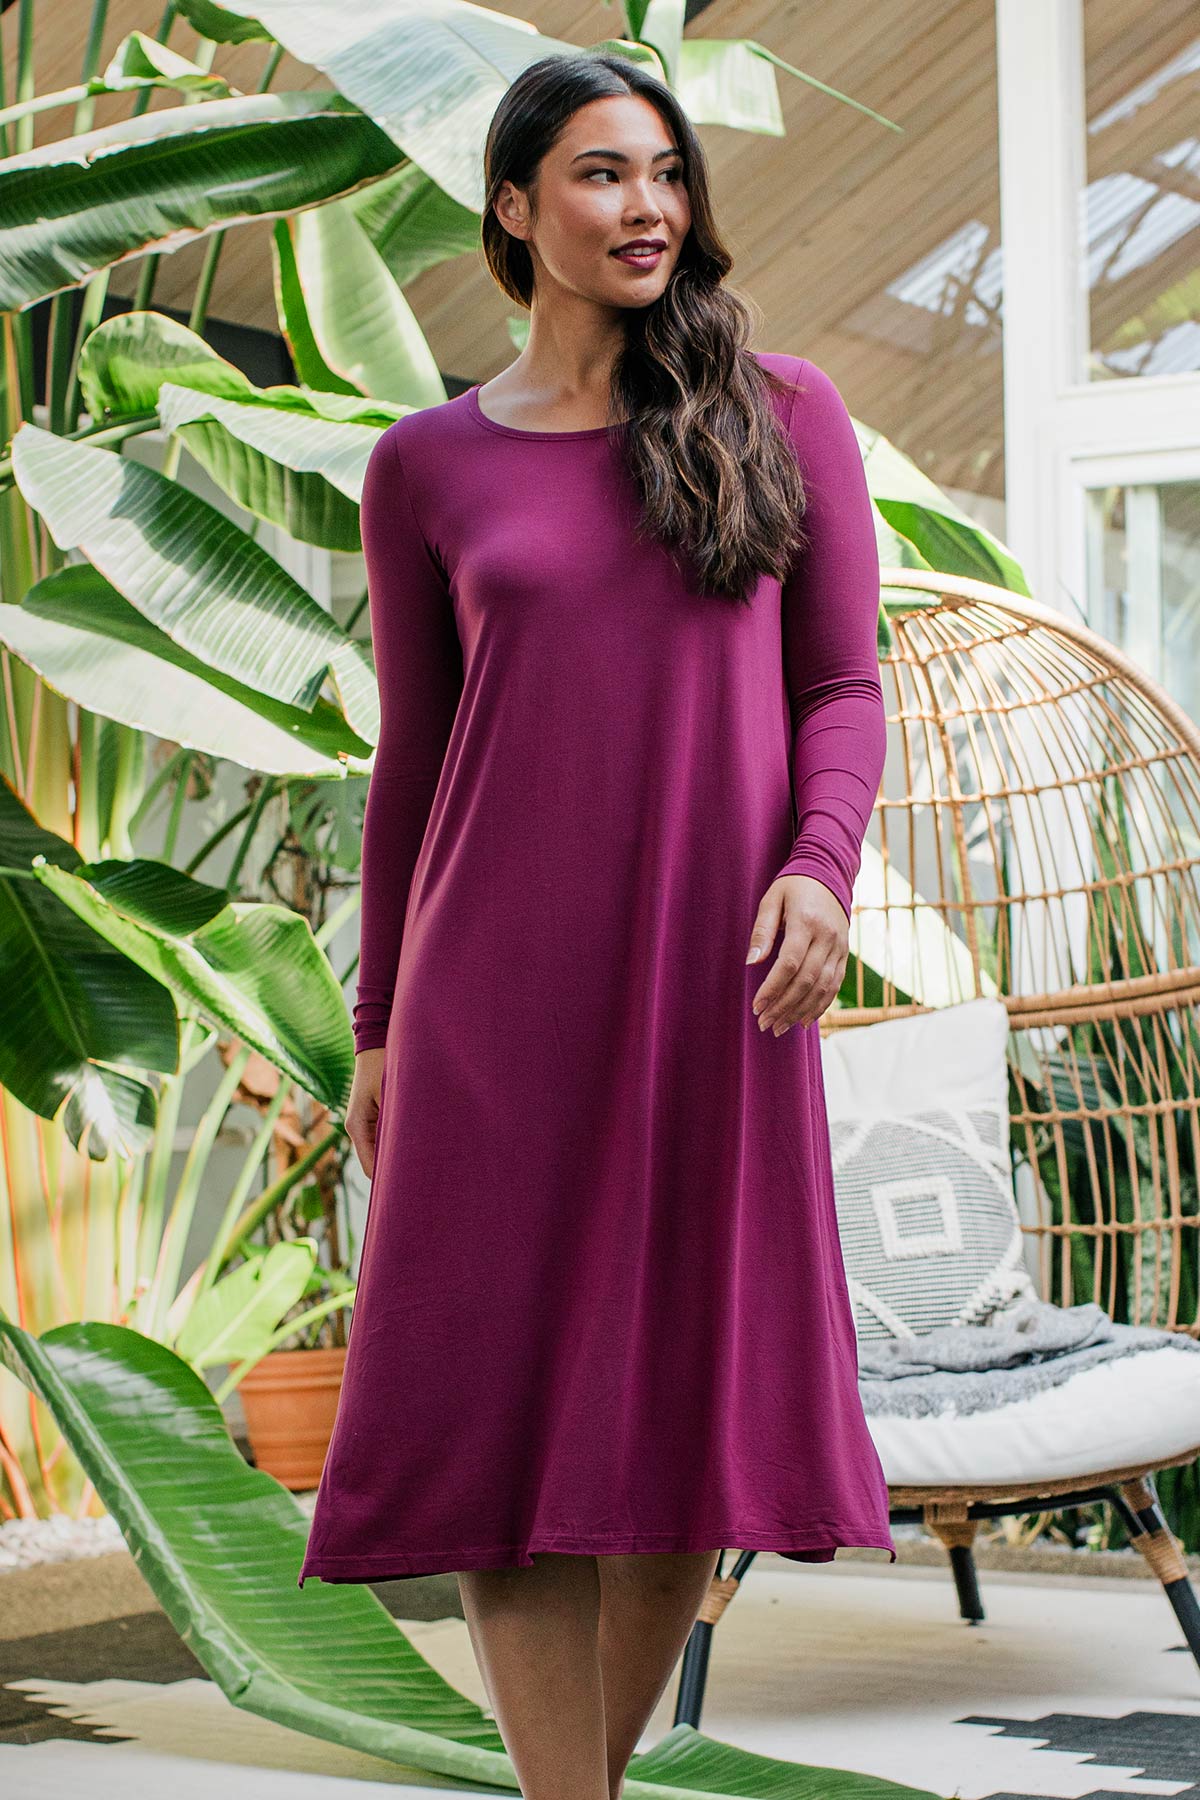 A woman striding forward and glancing off to the side, wearing Yala Neesha Scoop Neck Long Sleeve Bamboo Nightgown in Boysenberry